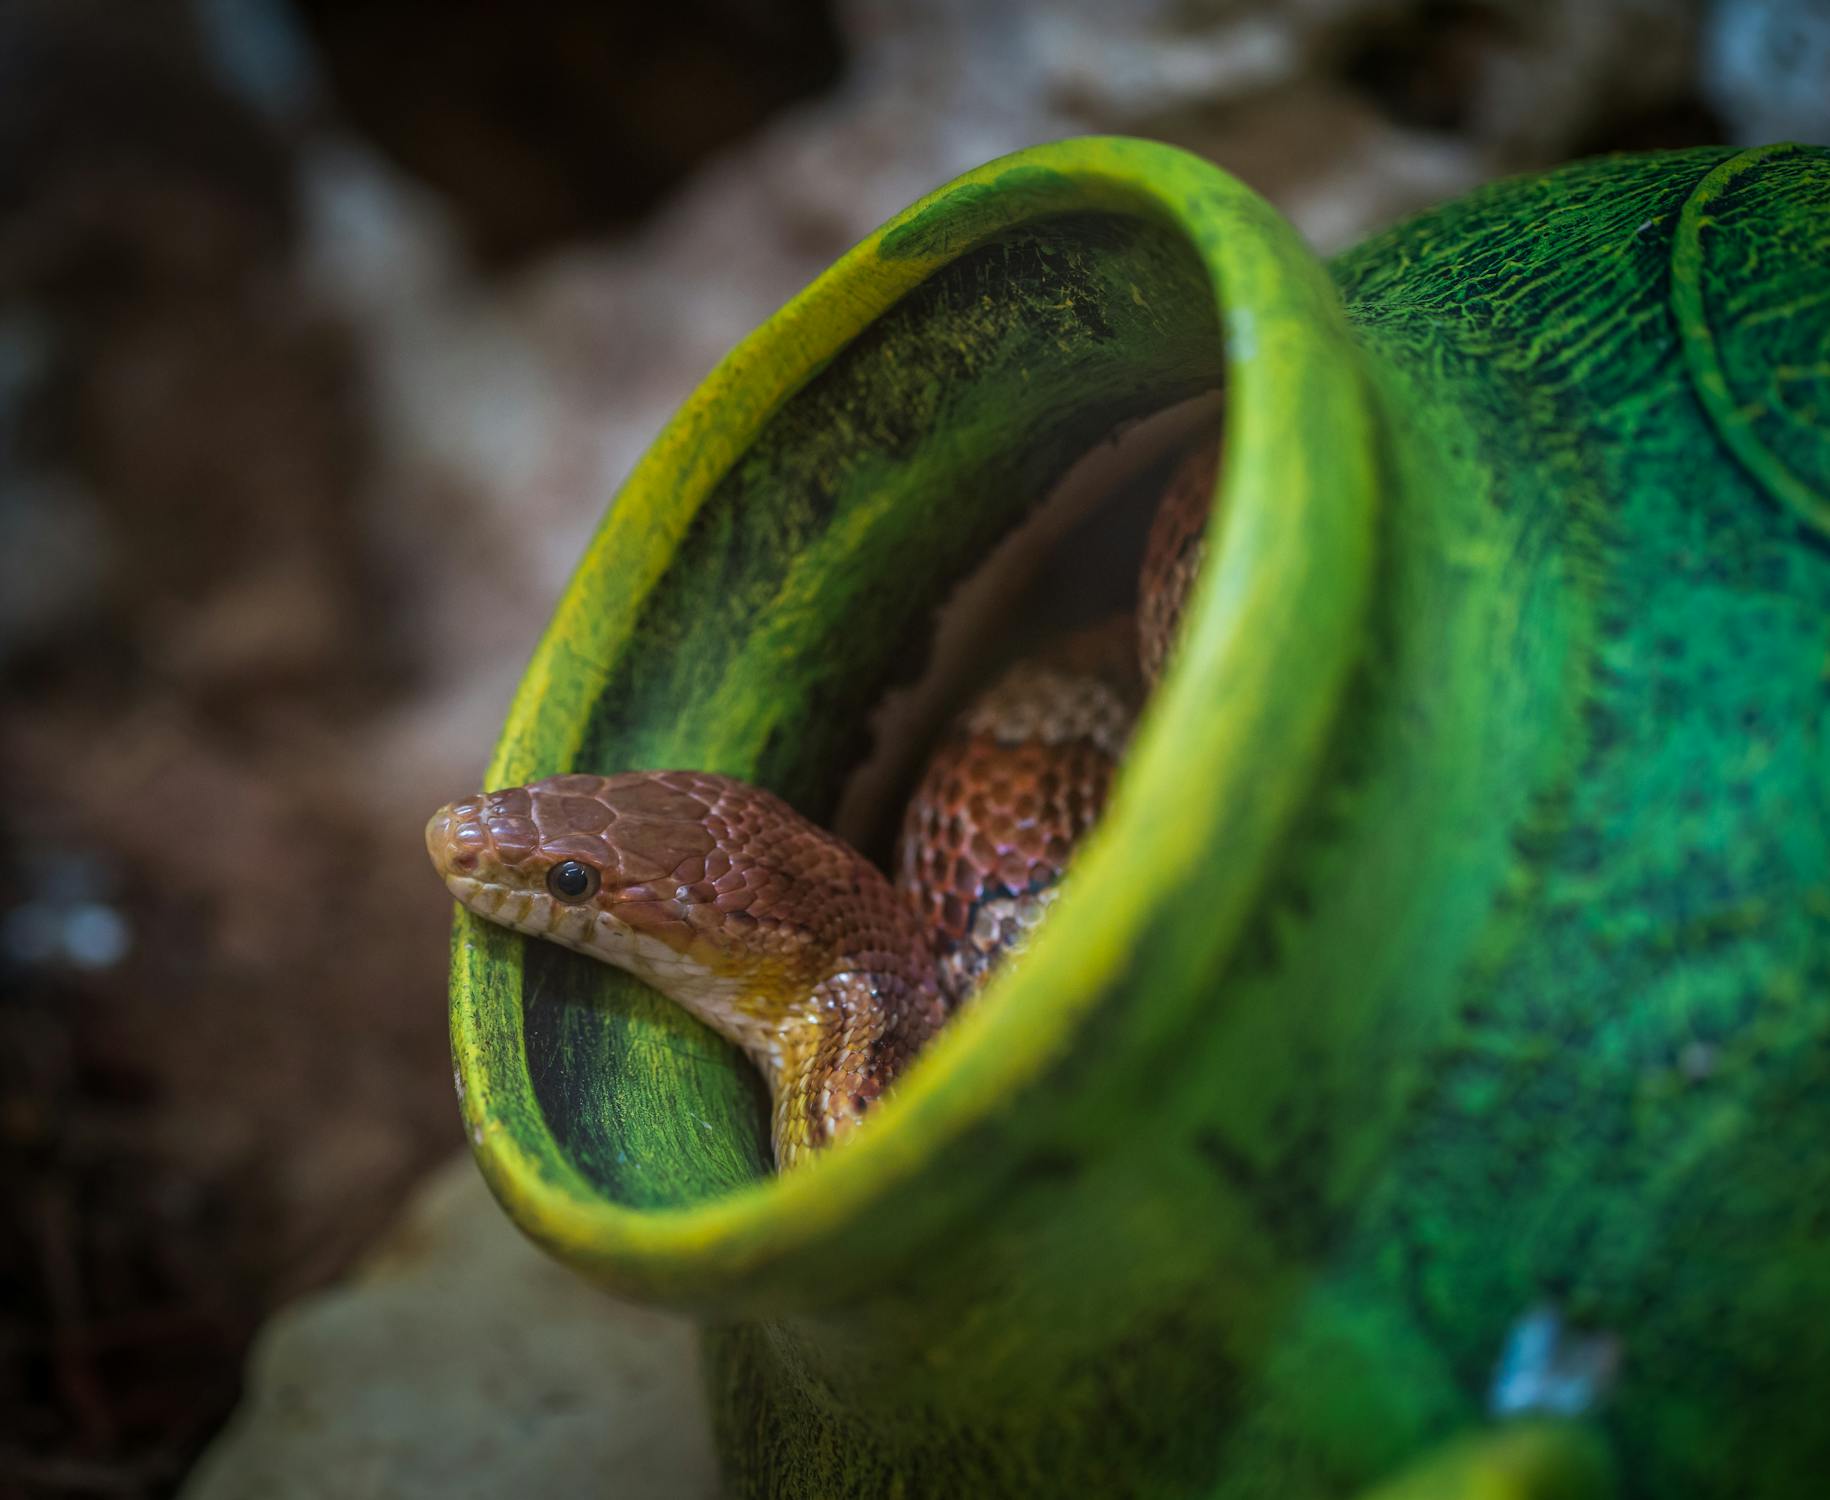 Snake Photo by Egor Kamelev from Pexels: https://www.pexels.com/photo/shallow-focus-photography-of-brown-snake-in-green-jar-922521/